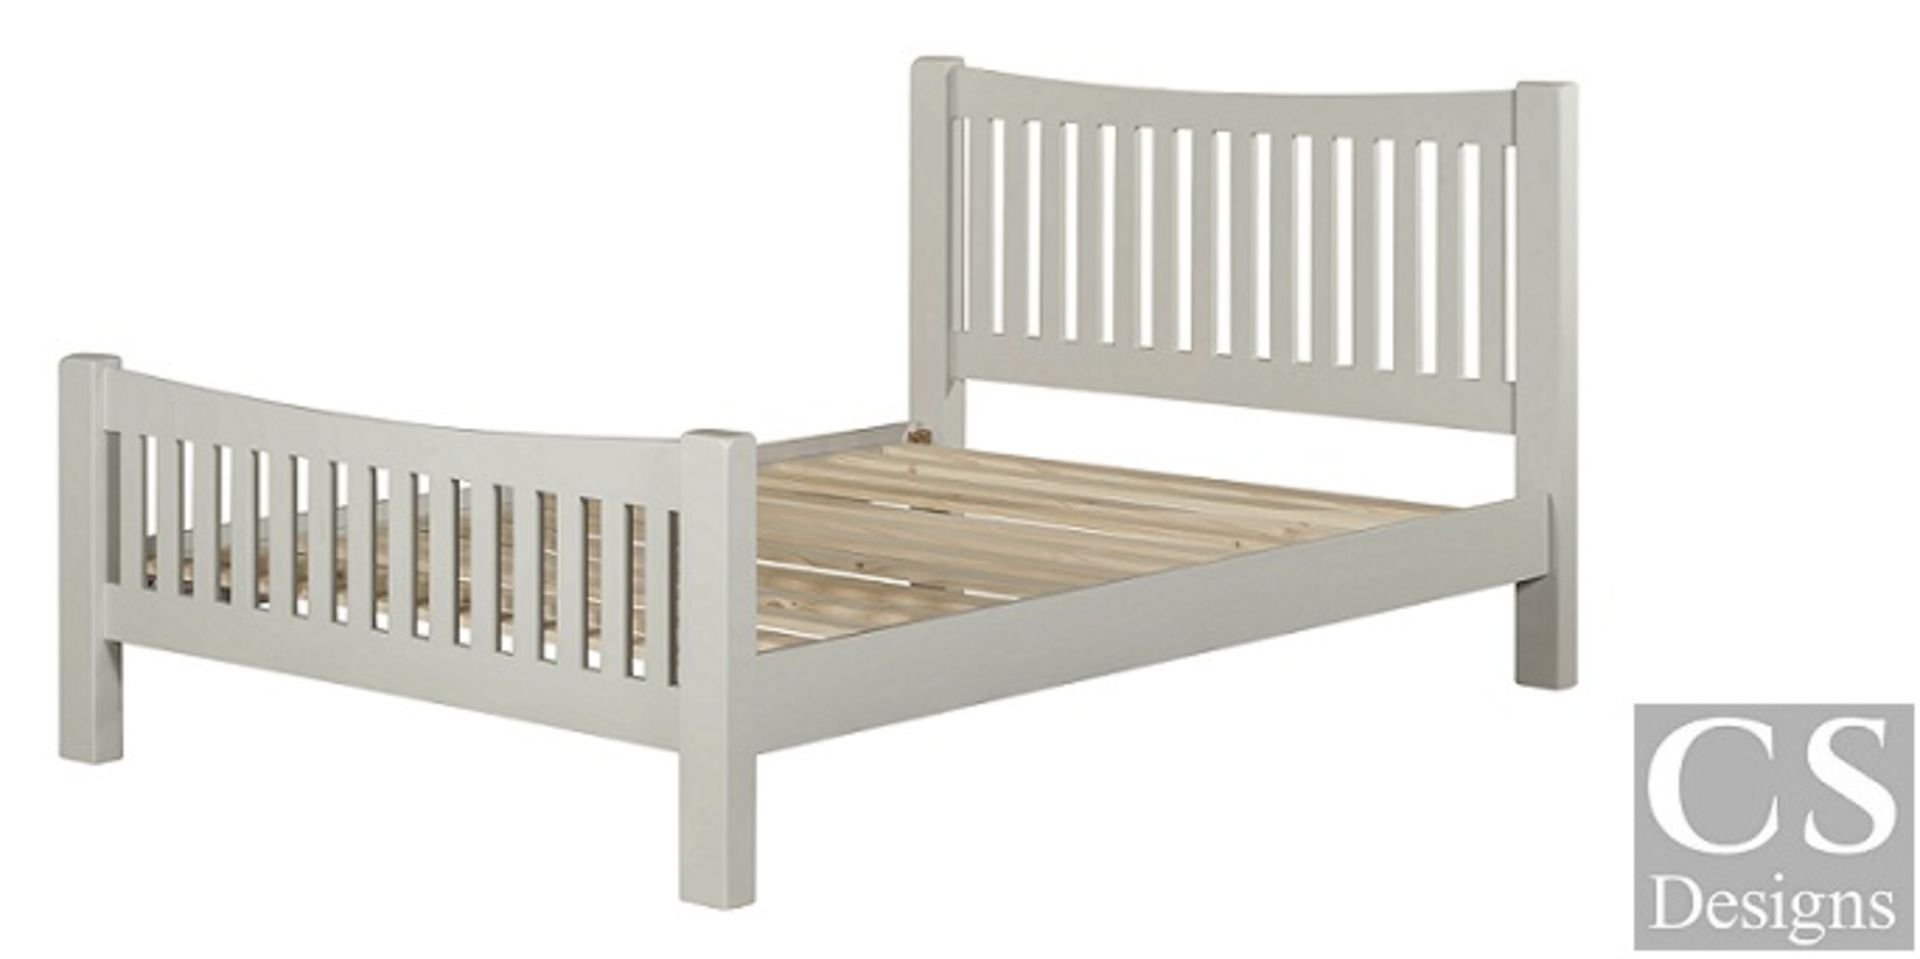 + VAT Brand New CS Designs "Daylesford" King Size Bed Frame With Natural Oak Tops And Solid